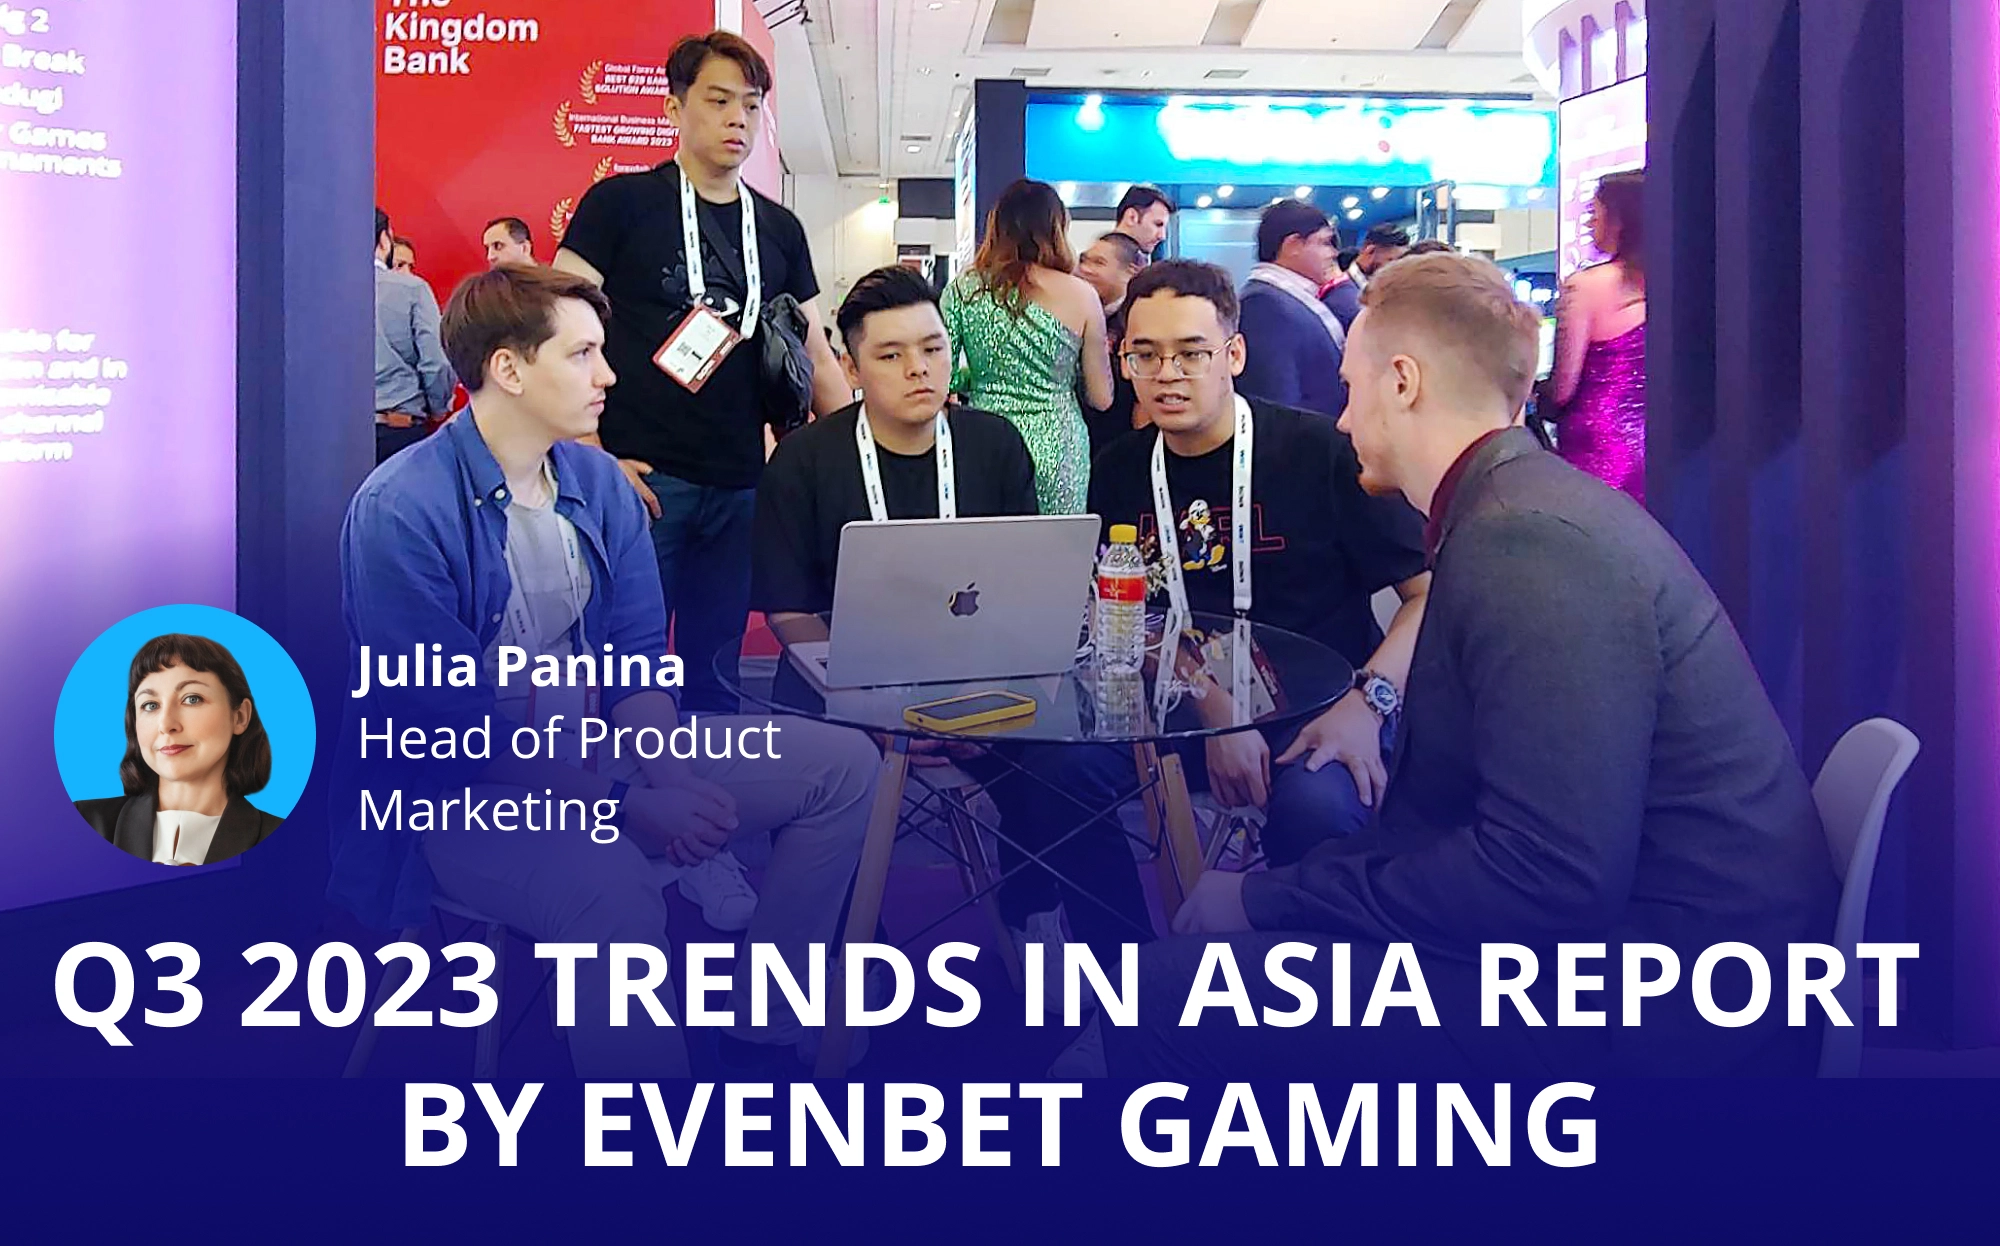 iGaming Trends in Asia in Q3 2023, Report by EvenBet Gaming